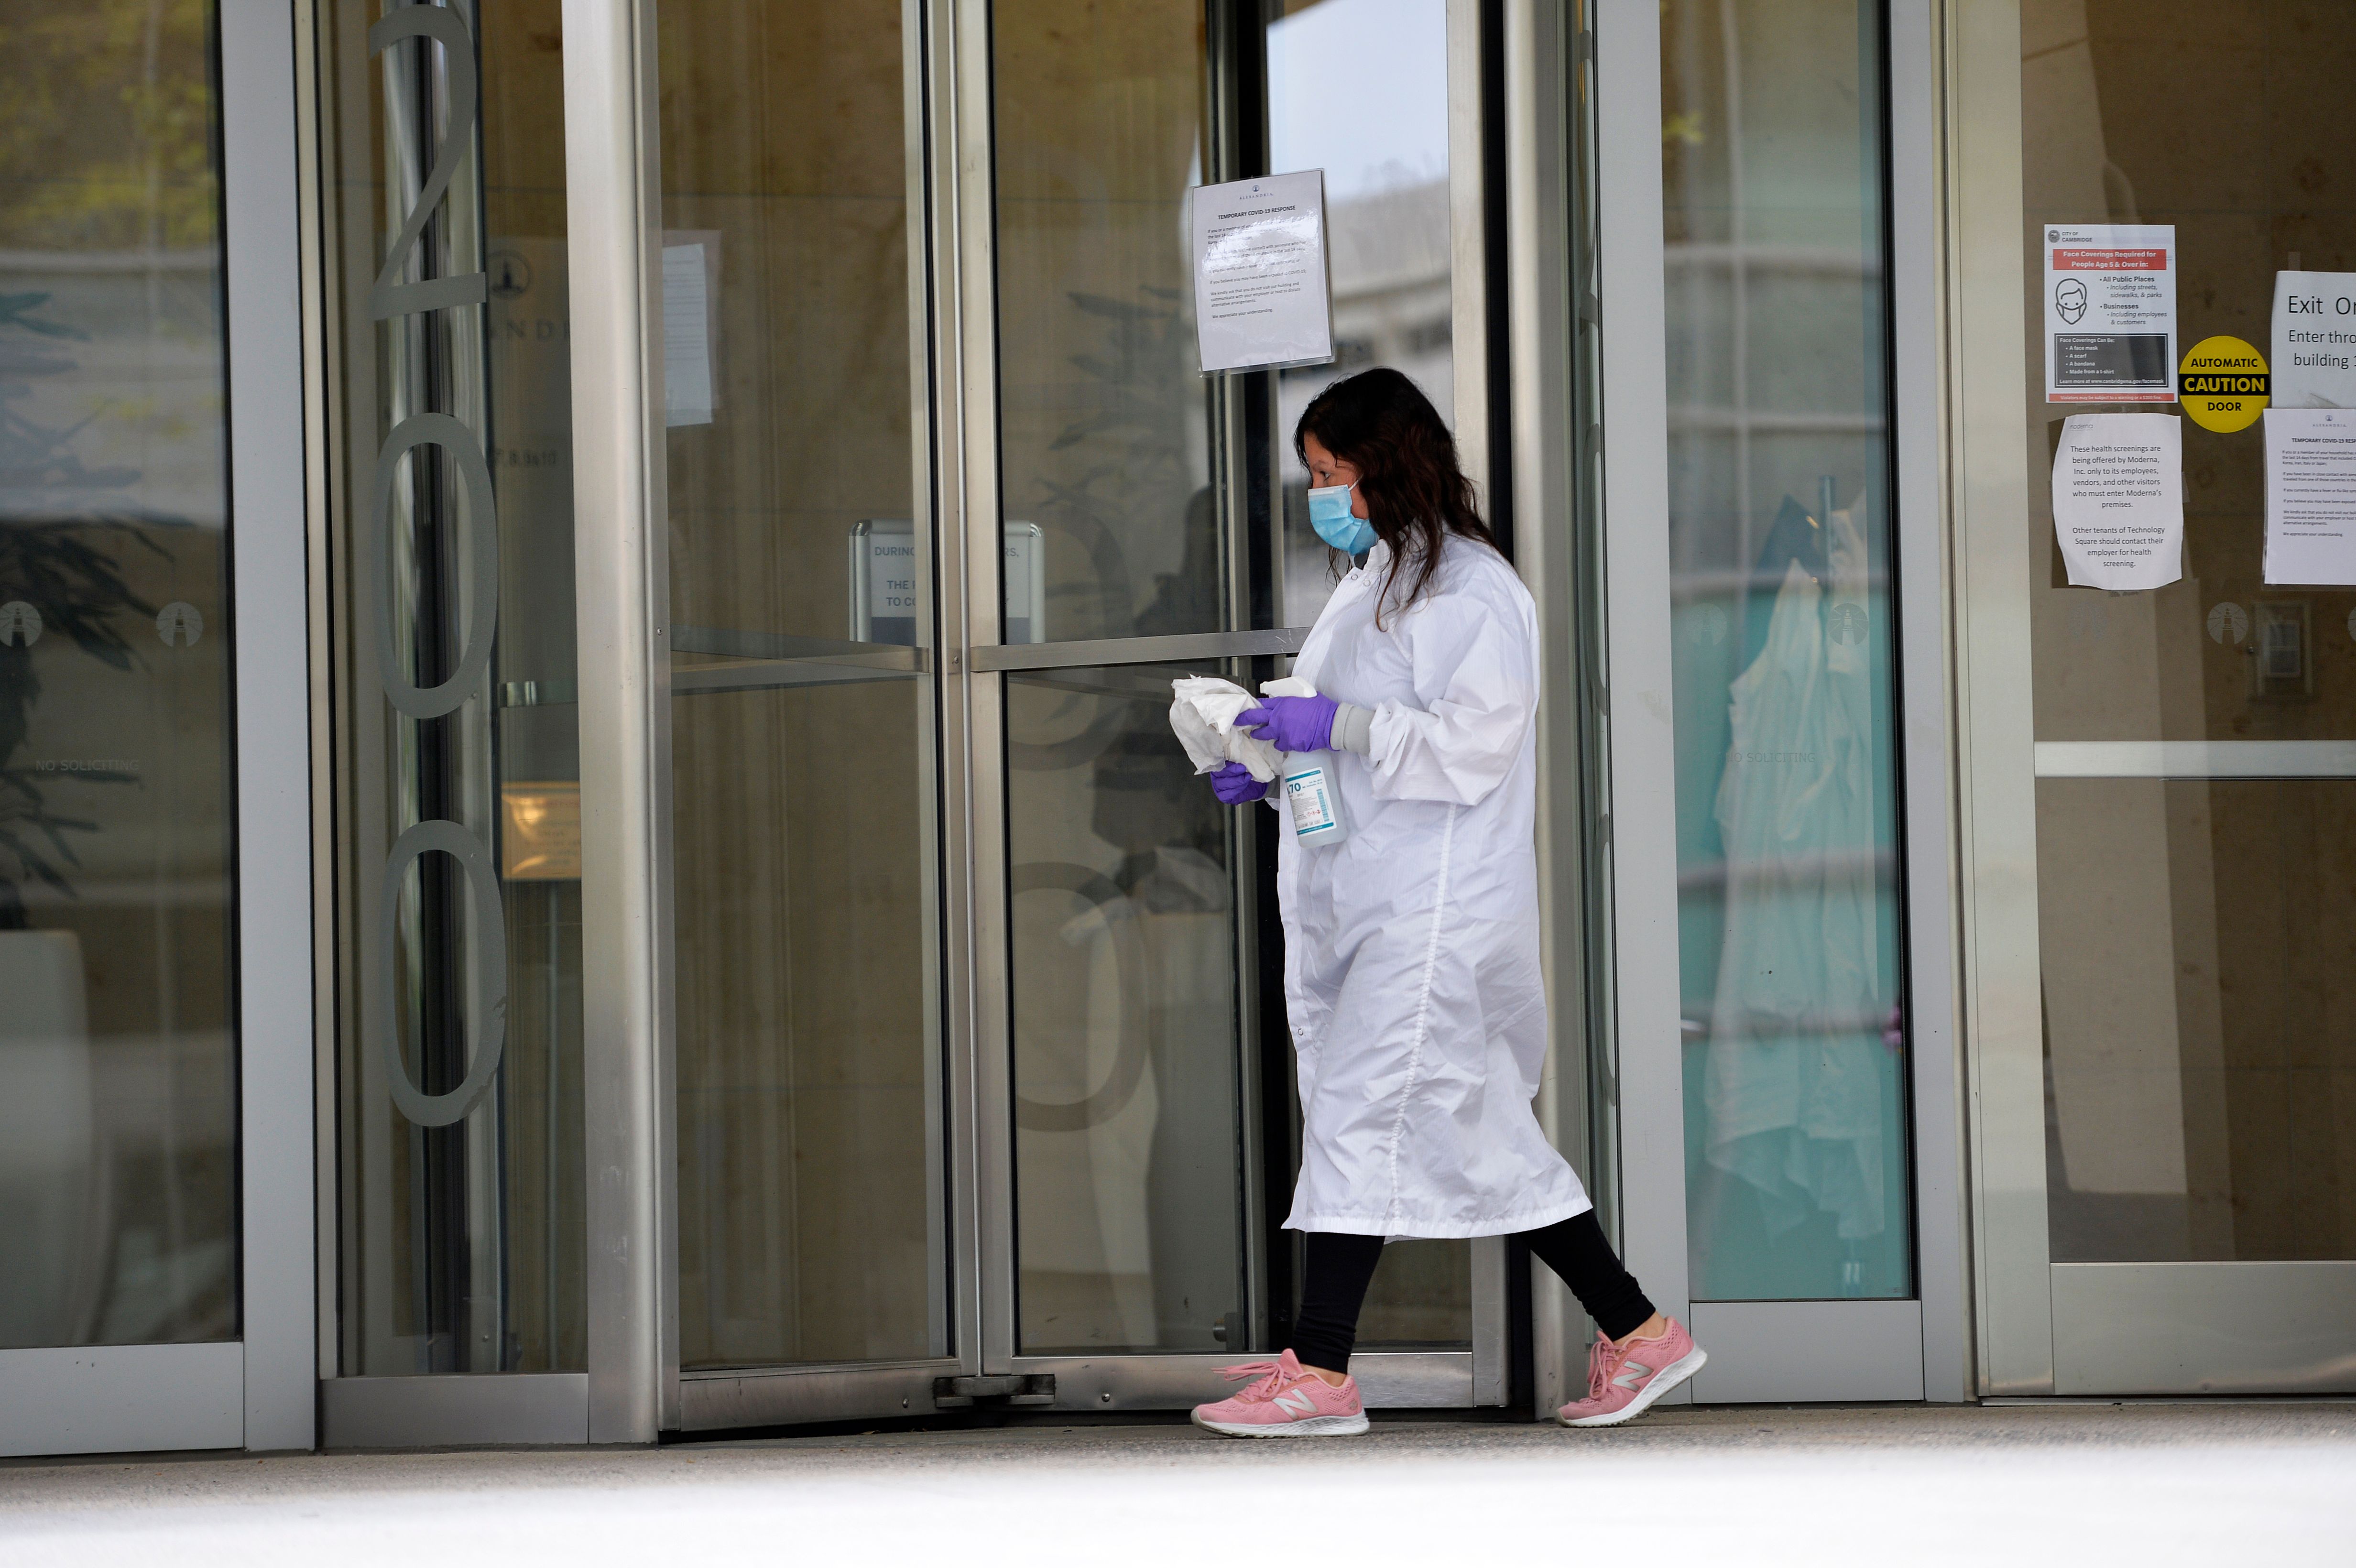 A women cleans the entrance doors to Moderna headquarters in Cambridge, Massachusetts on May 18, 2020. - US biotech firm Moderna reported promising early results from the first clinical tests of an experimental vaccine against the novel coronavirus performed on a small number of volunteers. The Cambridge, Massachusetts-based company said the vaccine candidate, mRNA-1273, appeared to produce an immune response in eight people who received it similar to that seen in people convalescing from the virus. (Photo by Joseph Prezioso / AFP) (Photo by JOSEPH PREZIOSO/AFP via Getty Images)